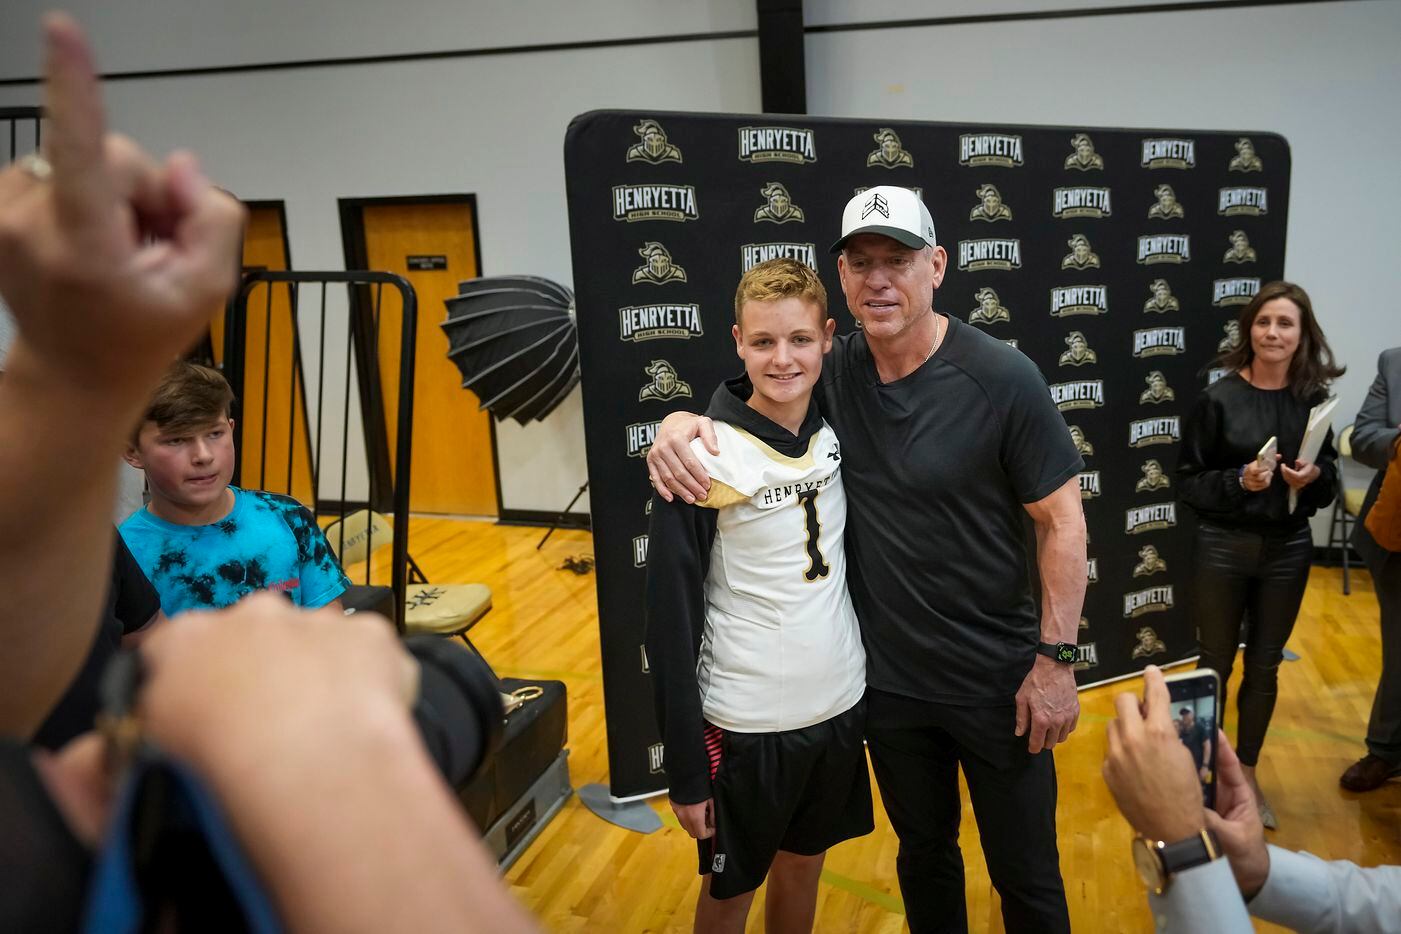 Troy Aikman poses for a photo with Henryetta quarterback Brady Norman after the pep rally.